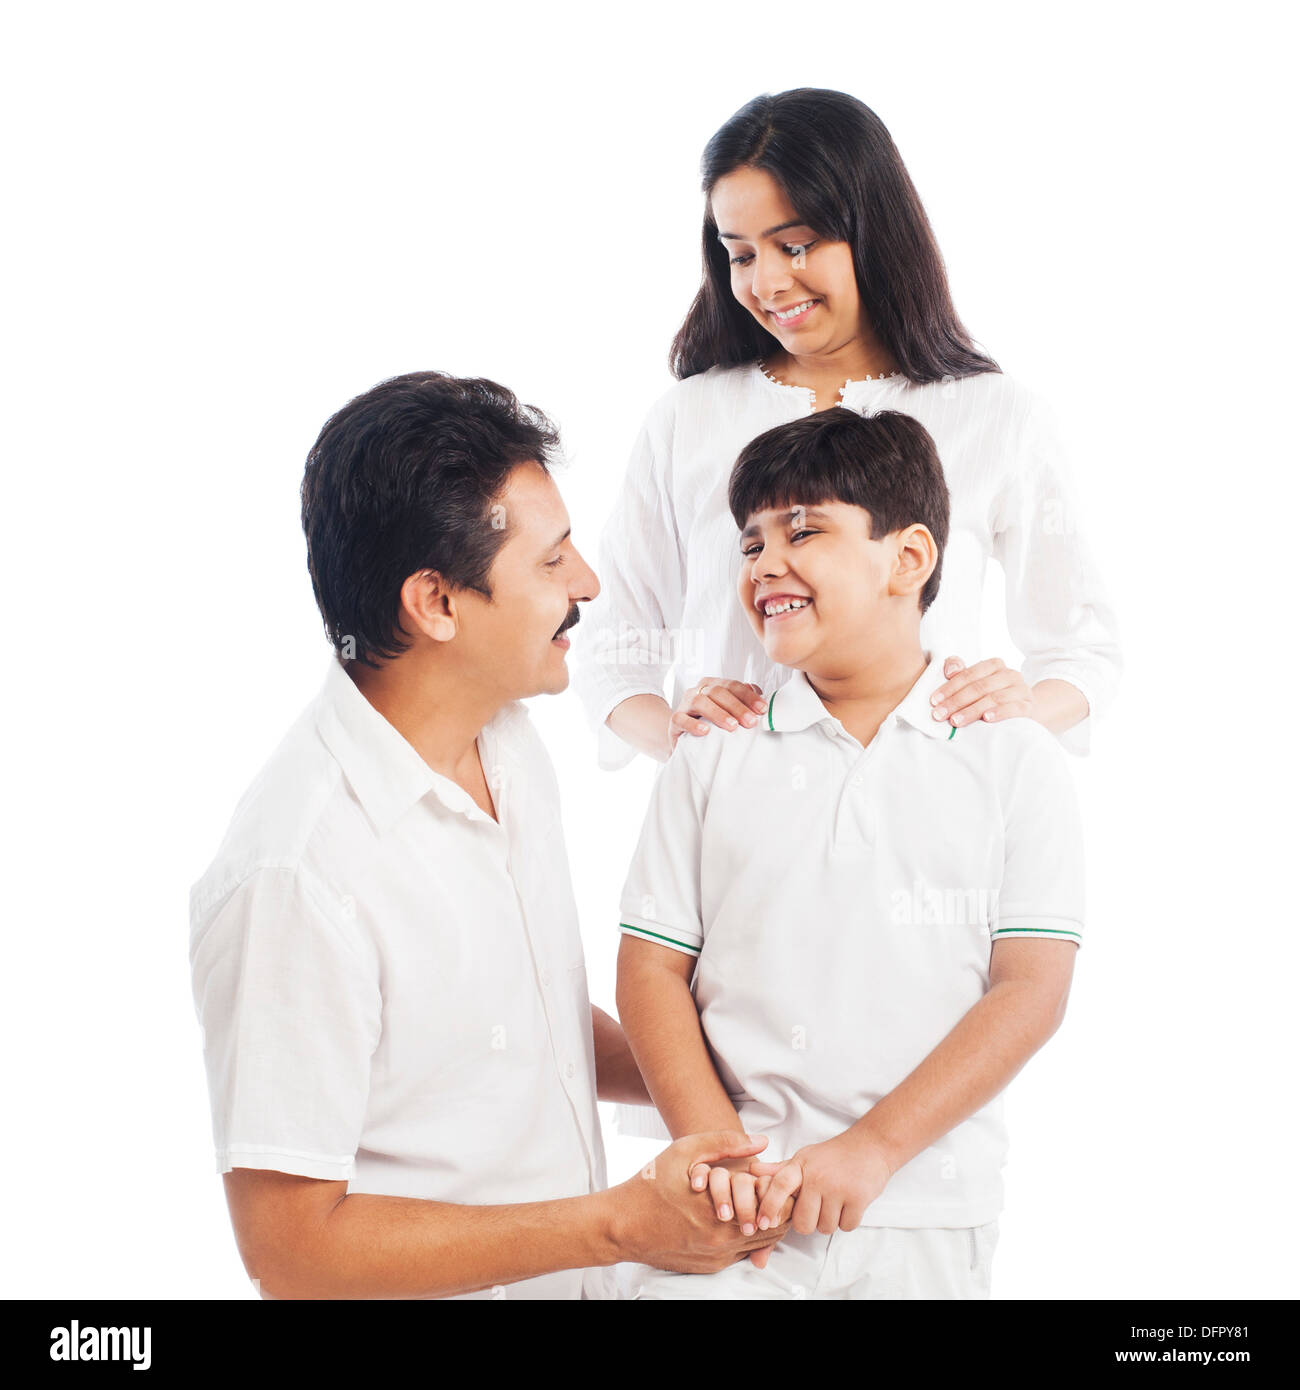 Smiling parents with their son Stock Photo